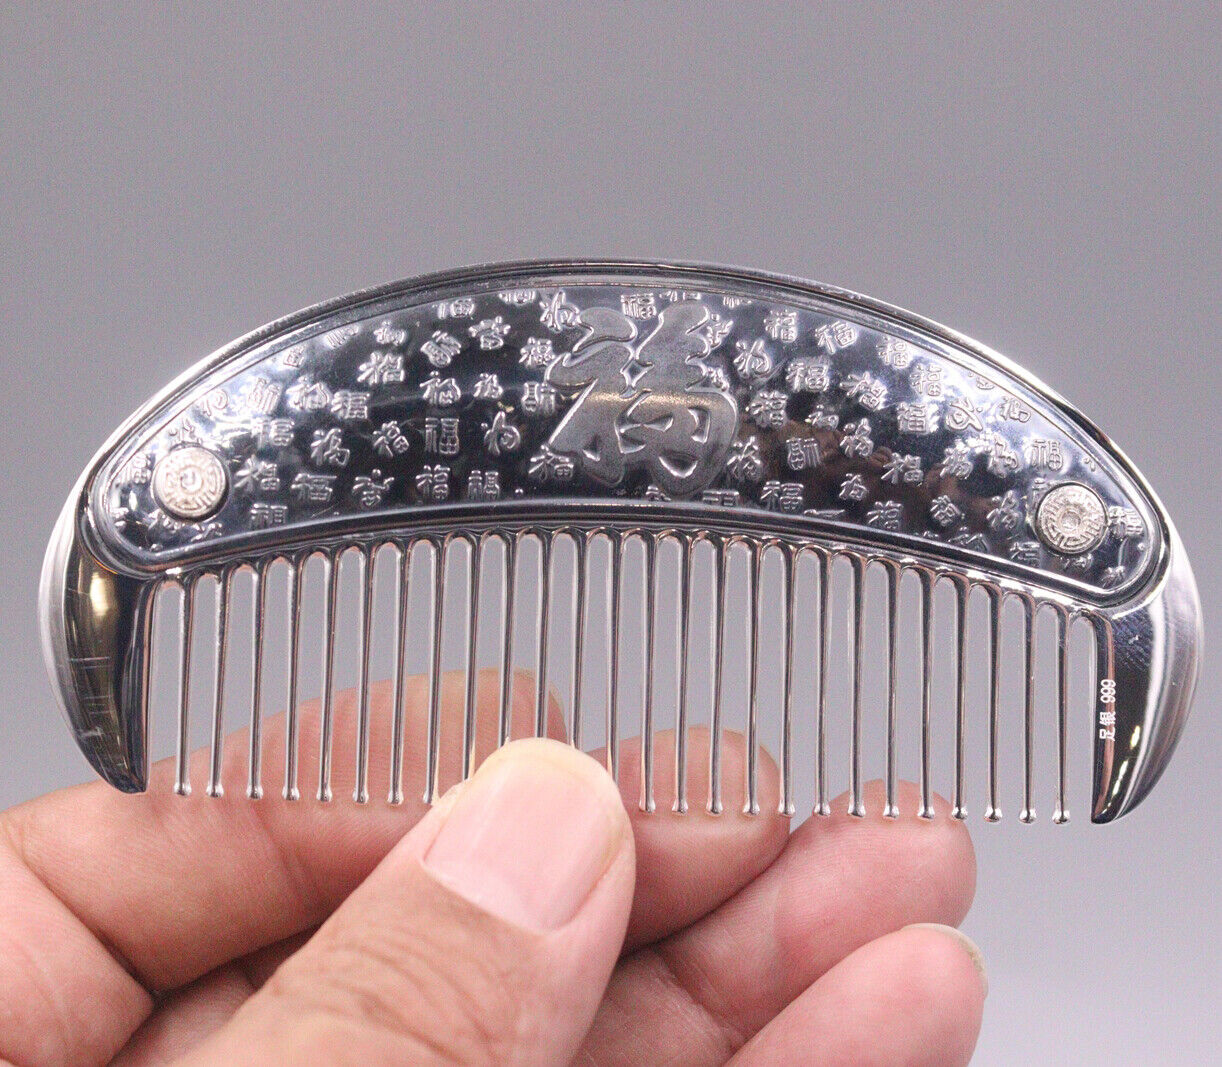 Real 999 Fine Silver Comb Vintage Many Blessing Thai Silver Comb Make Up/3.86inL